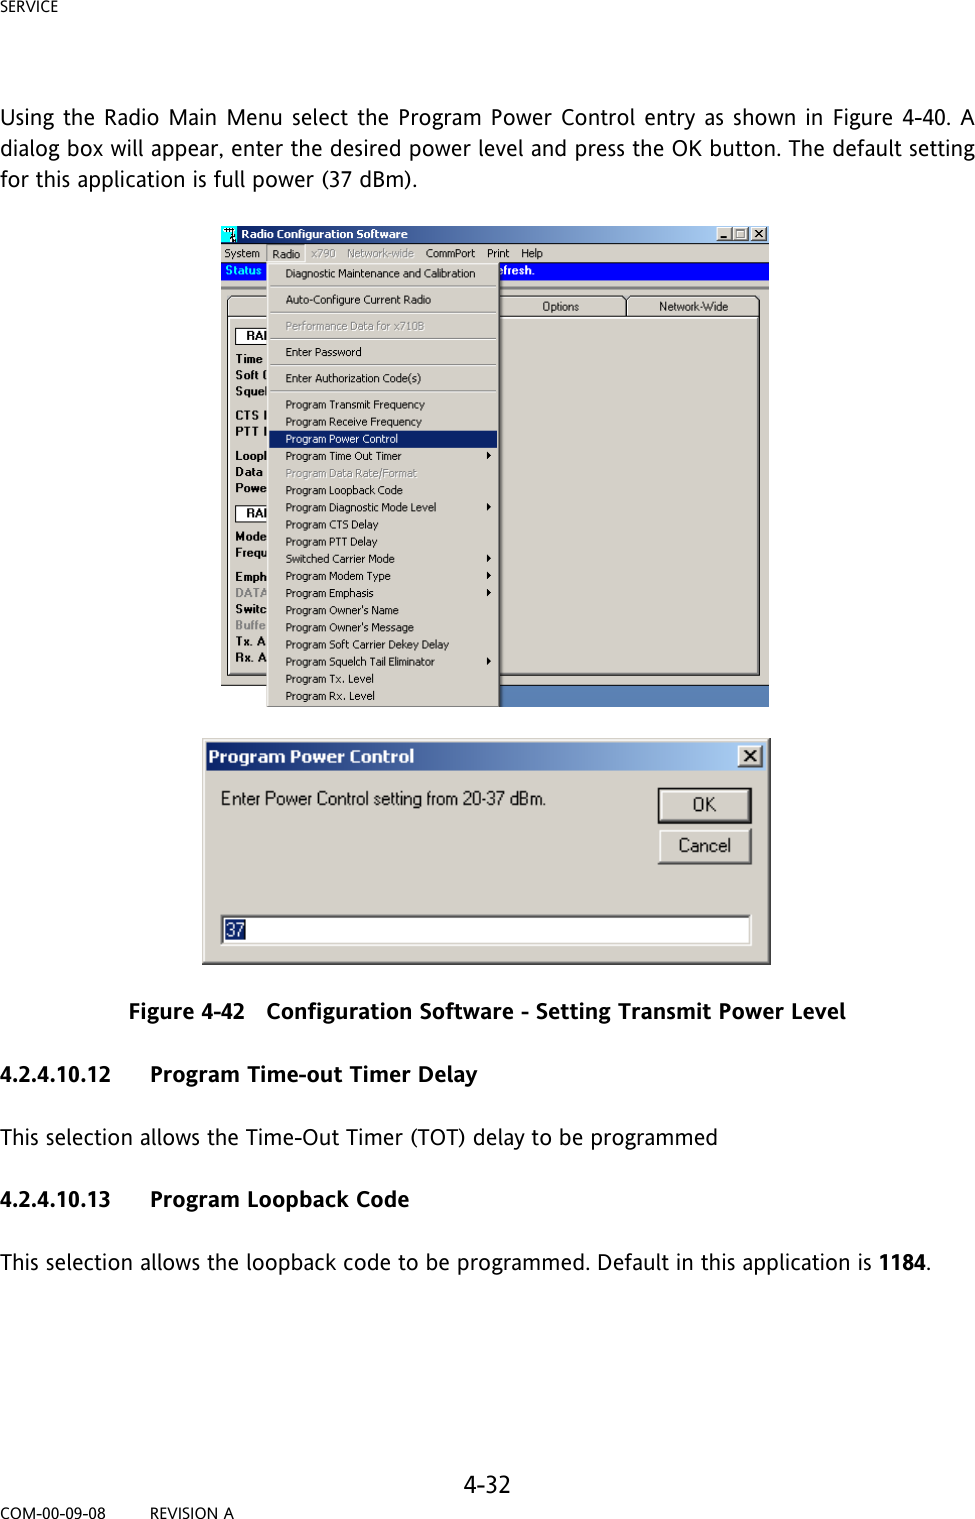 SERVICE     4-32 COM-00-09-08         REVISION A  Using the Radio Main Menu select the Program Power Control entry as shown in Figure 4-40. A dialog box will appear, enter the desired power level and press the OK button. The default setting for this application is full power (37 dBm).   Figure 4-42   Configuration Software - Setting Transmit Power Level  4.2.4.10.12 Program Time-out Timer Delay  This selection allows the Time-Out Timer (TOT) delay to be programmed  4.2.4.10.13 Program Loopback Code  This selection allows the loopback code to be programmed. Default in this application is 1184.      